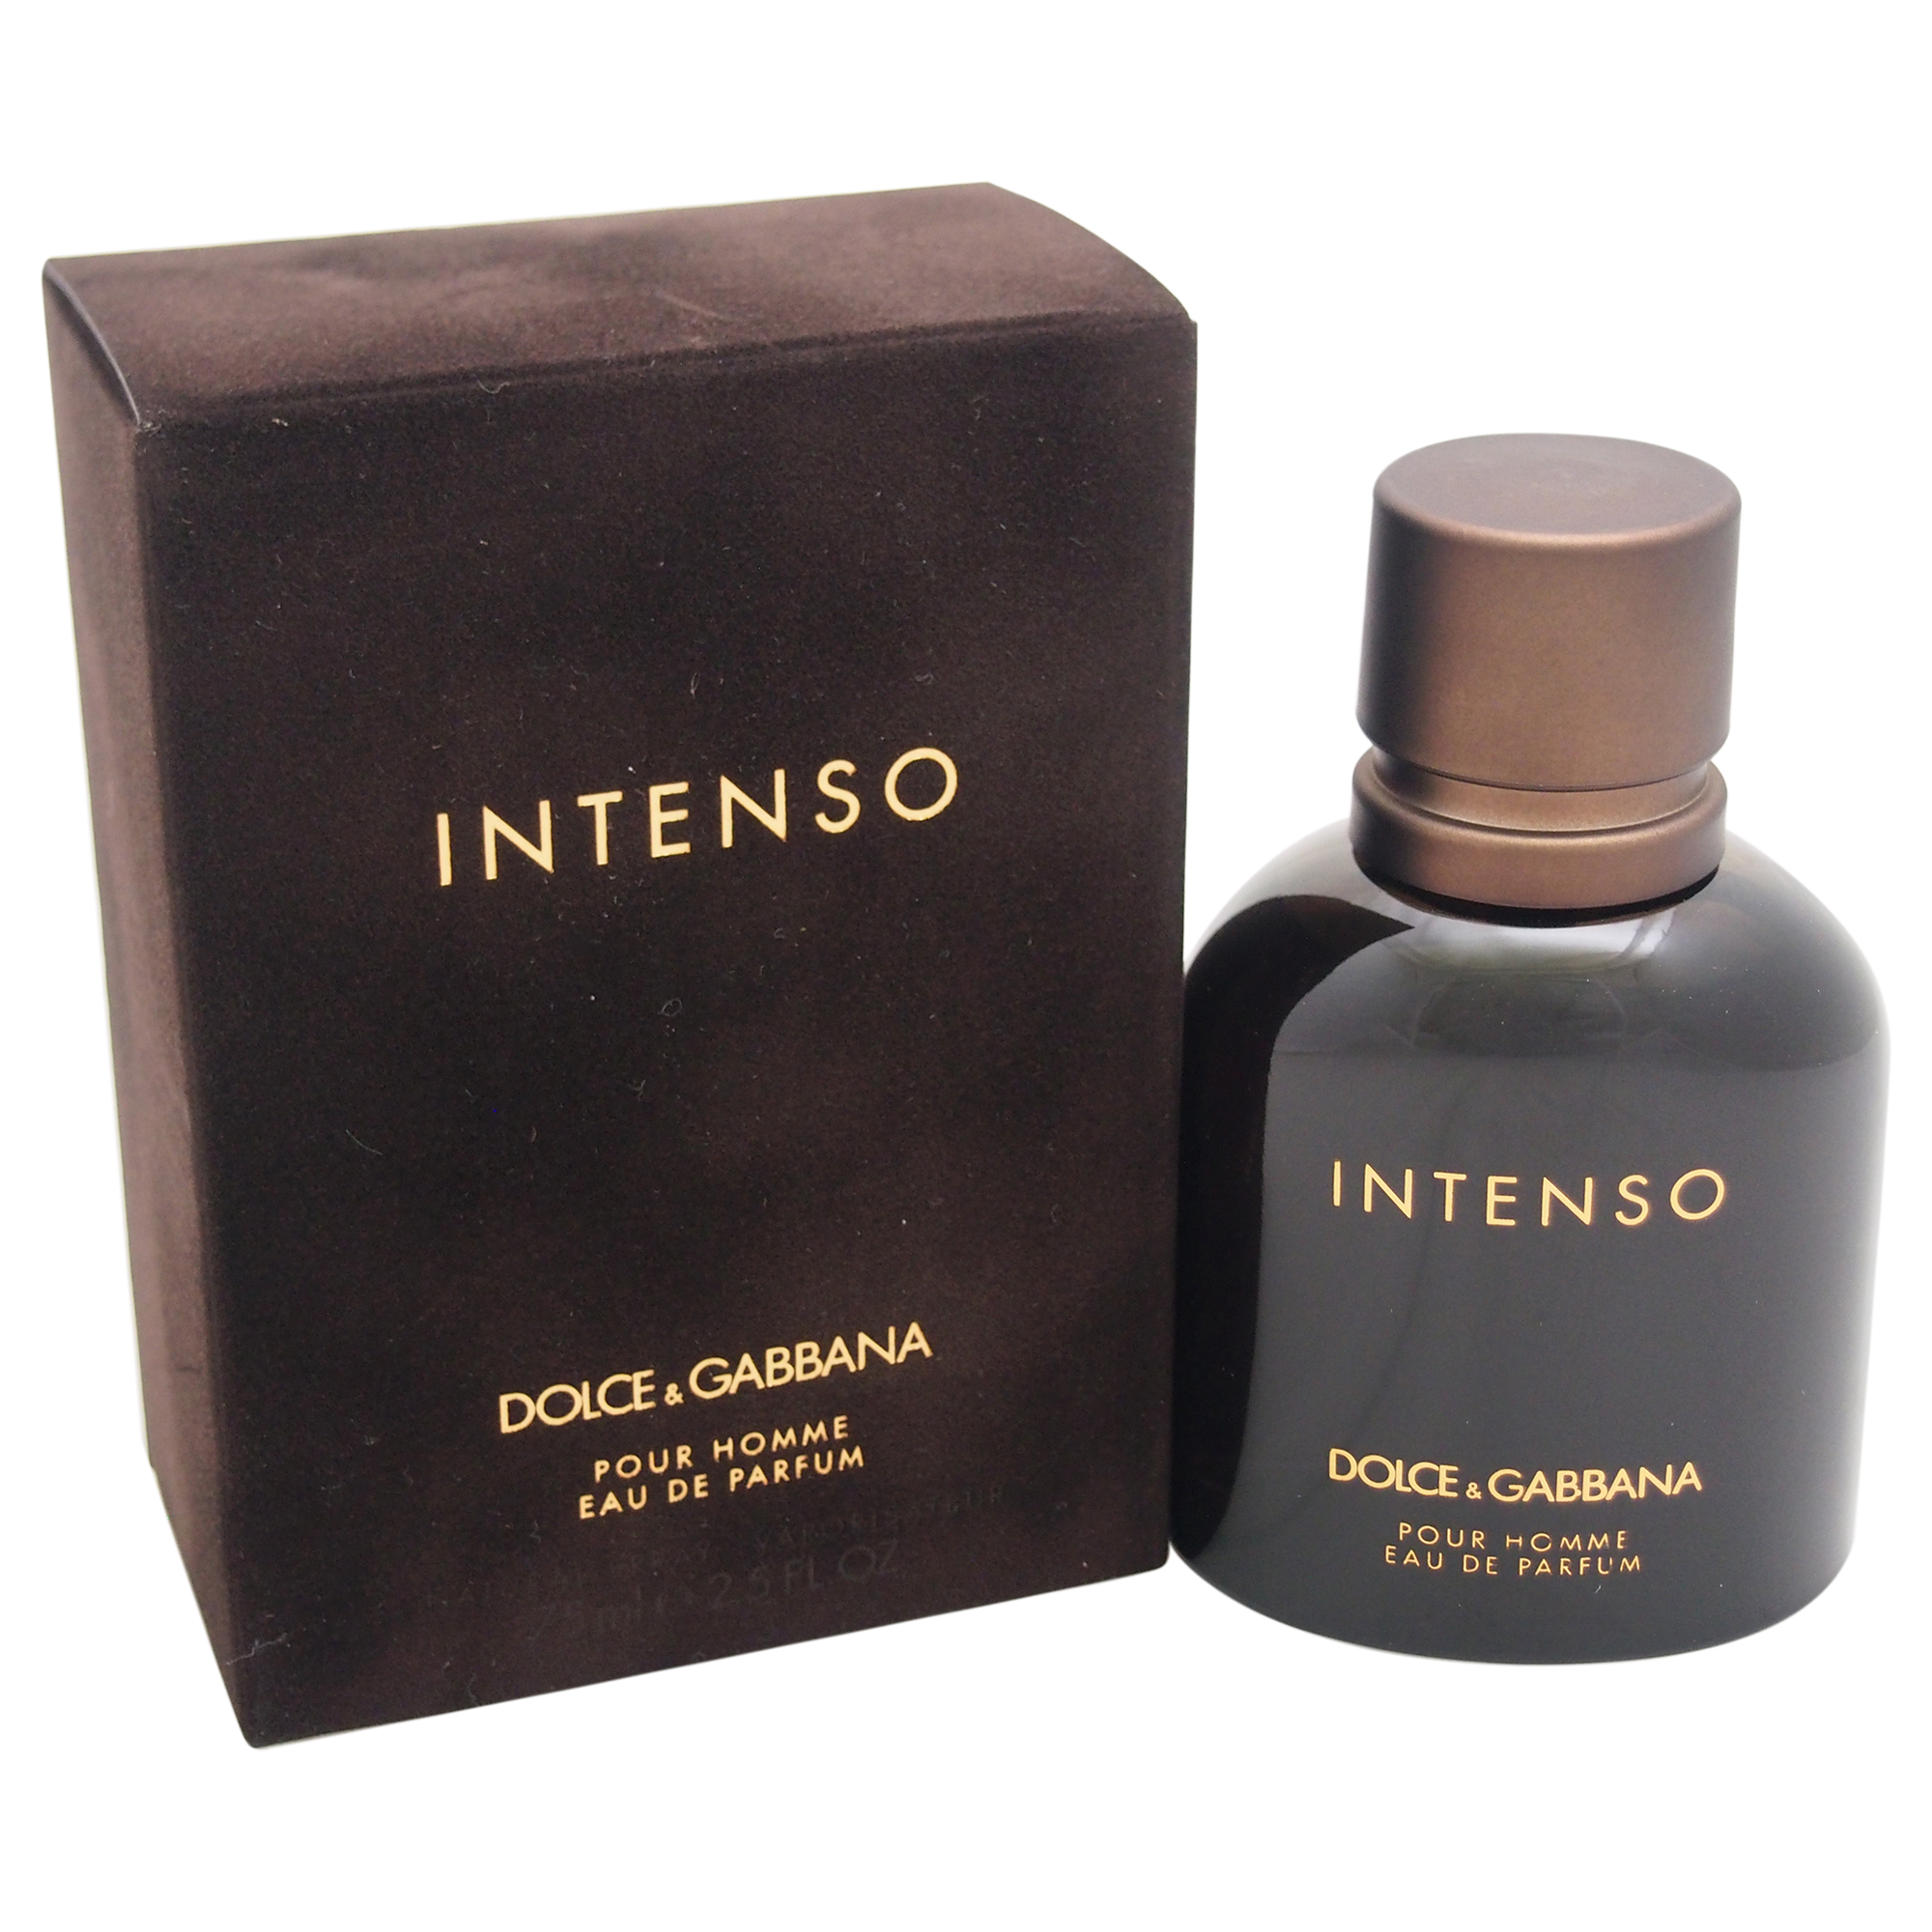 dolce & gabbana intenso pour homme edp